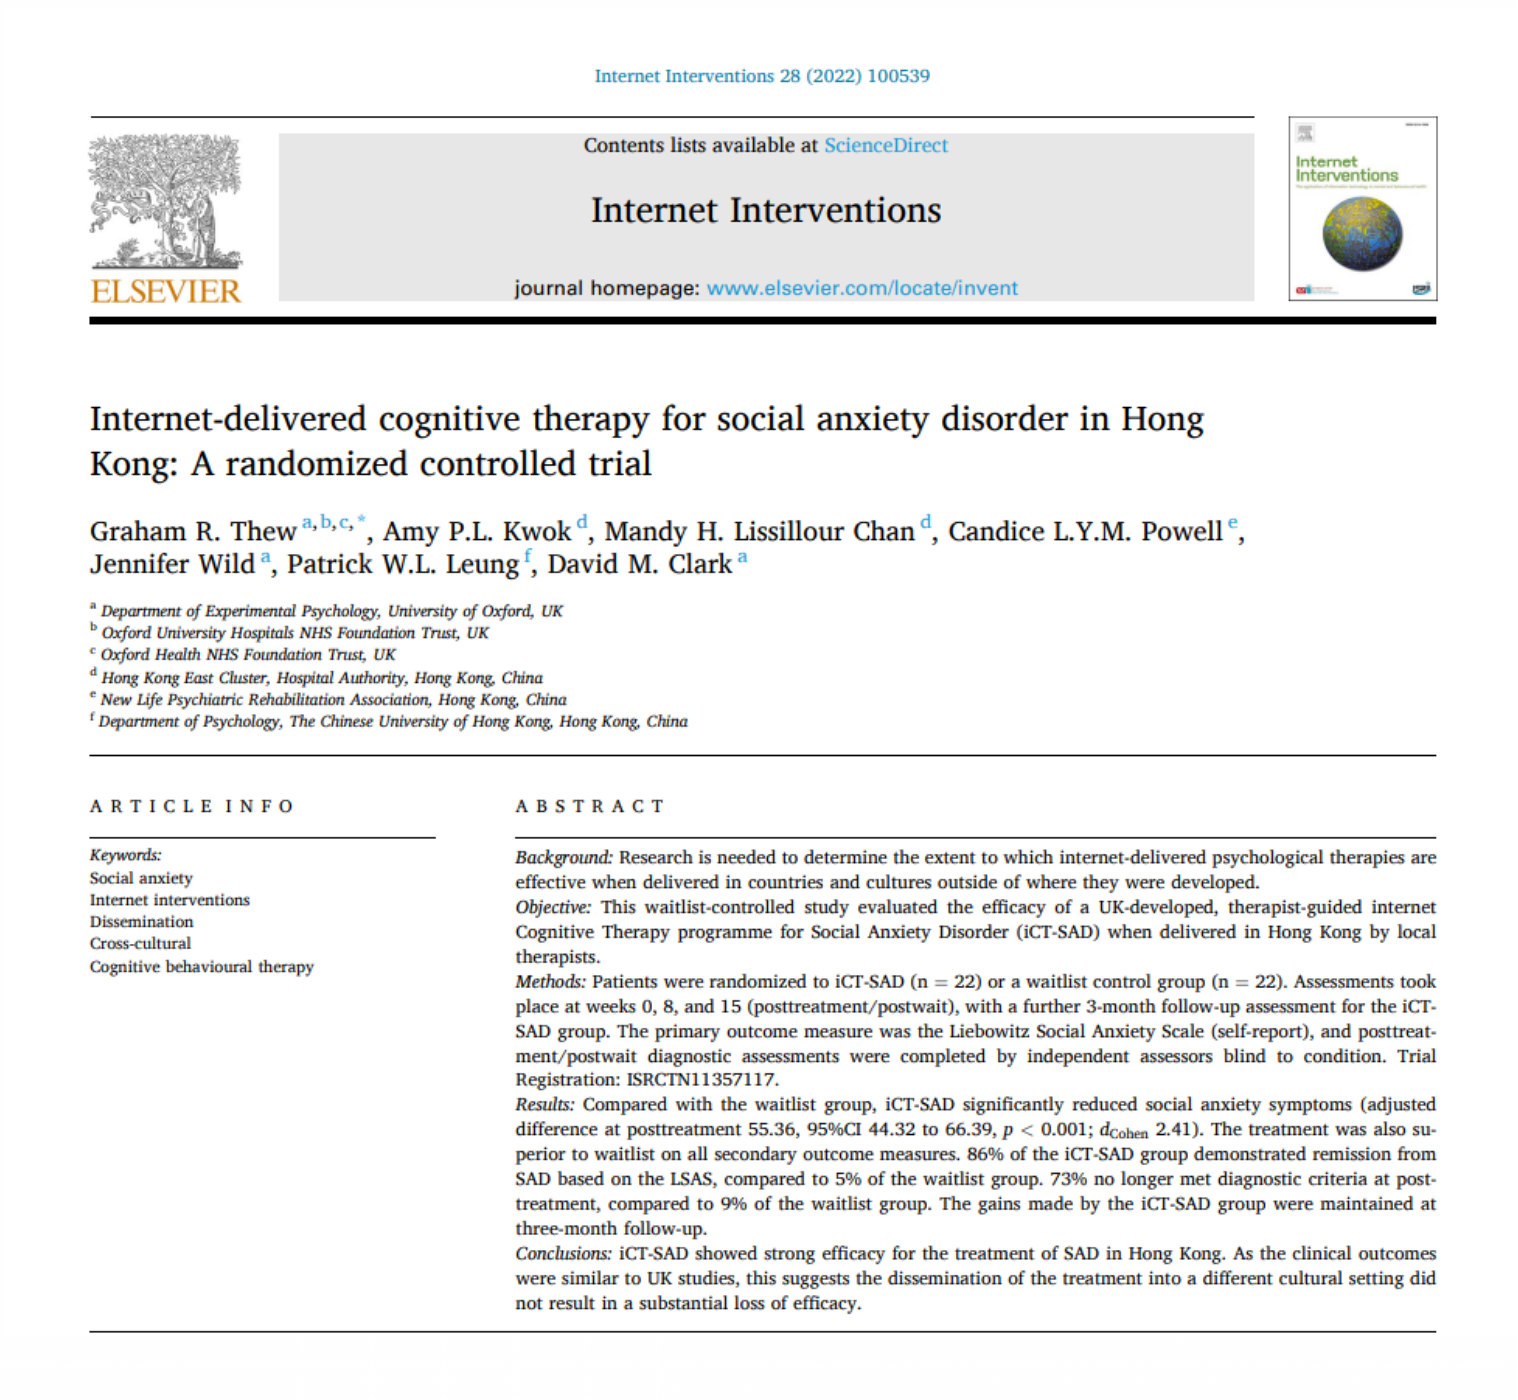 Internet-delivered cognitive therapy for social anxiety disorder in Hong Kong